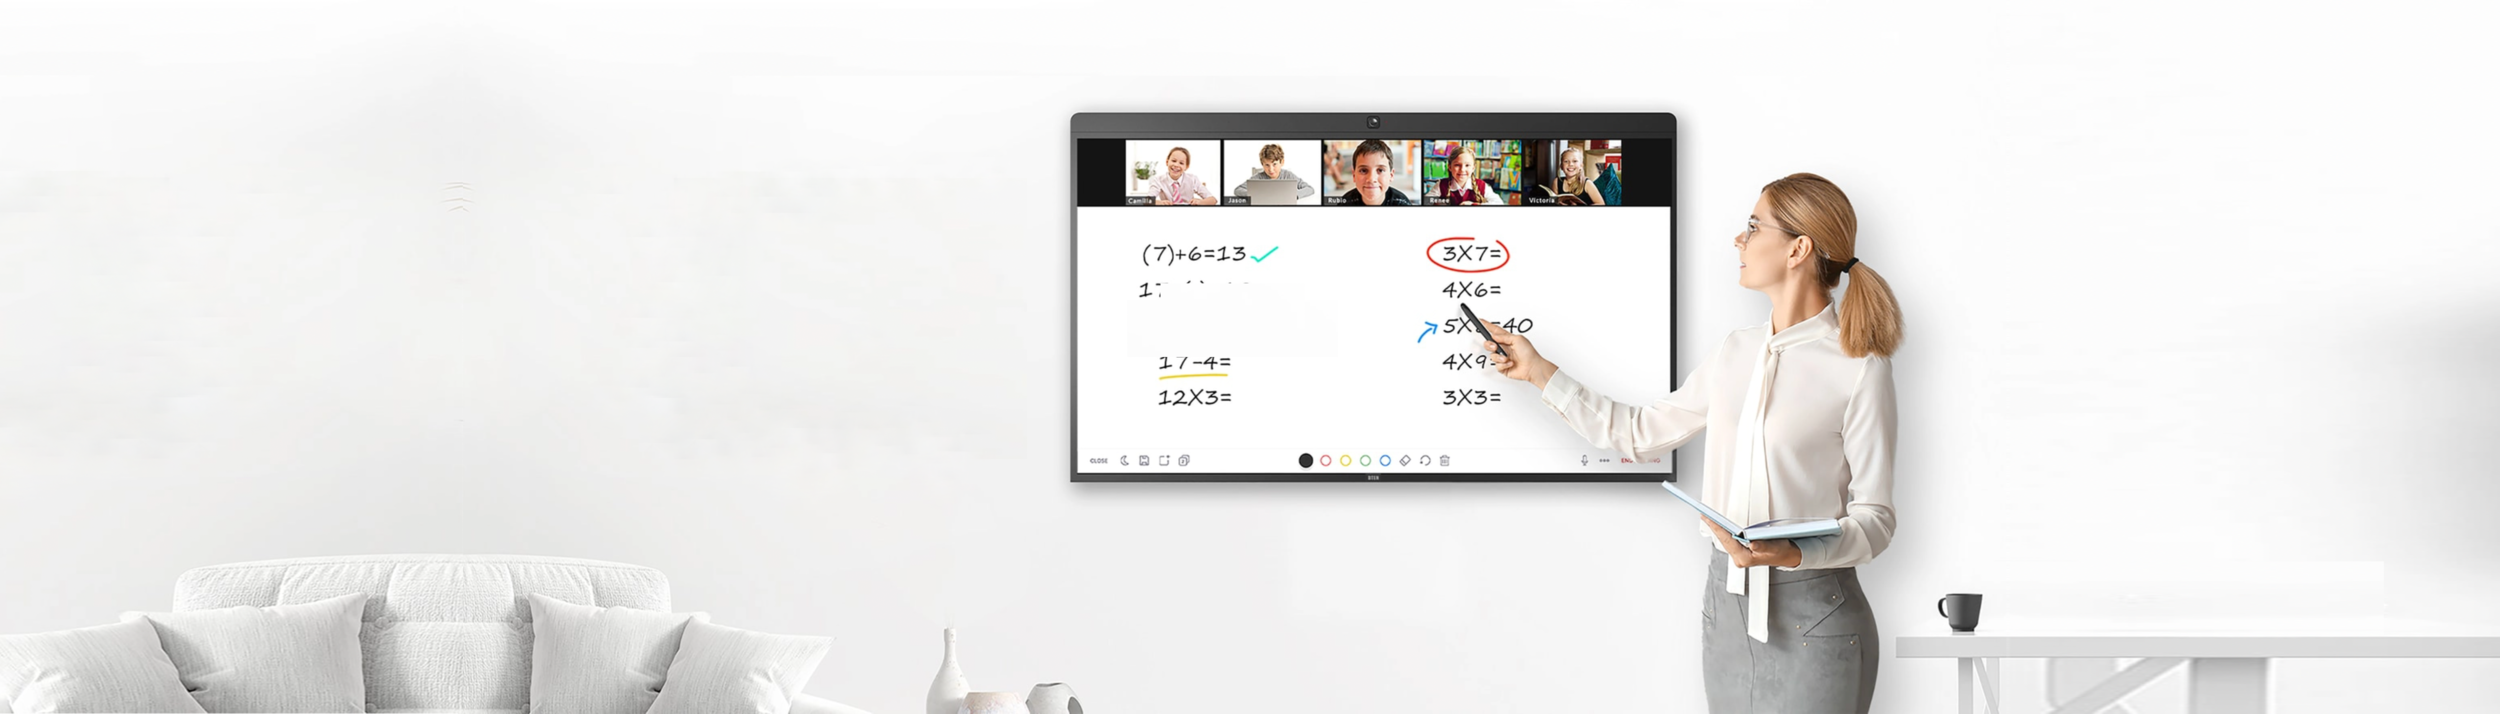 Classroom Screen - Handy Set of Teaching Apps for your Whiteboard